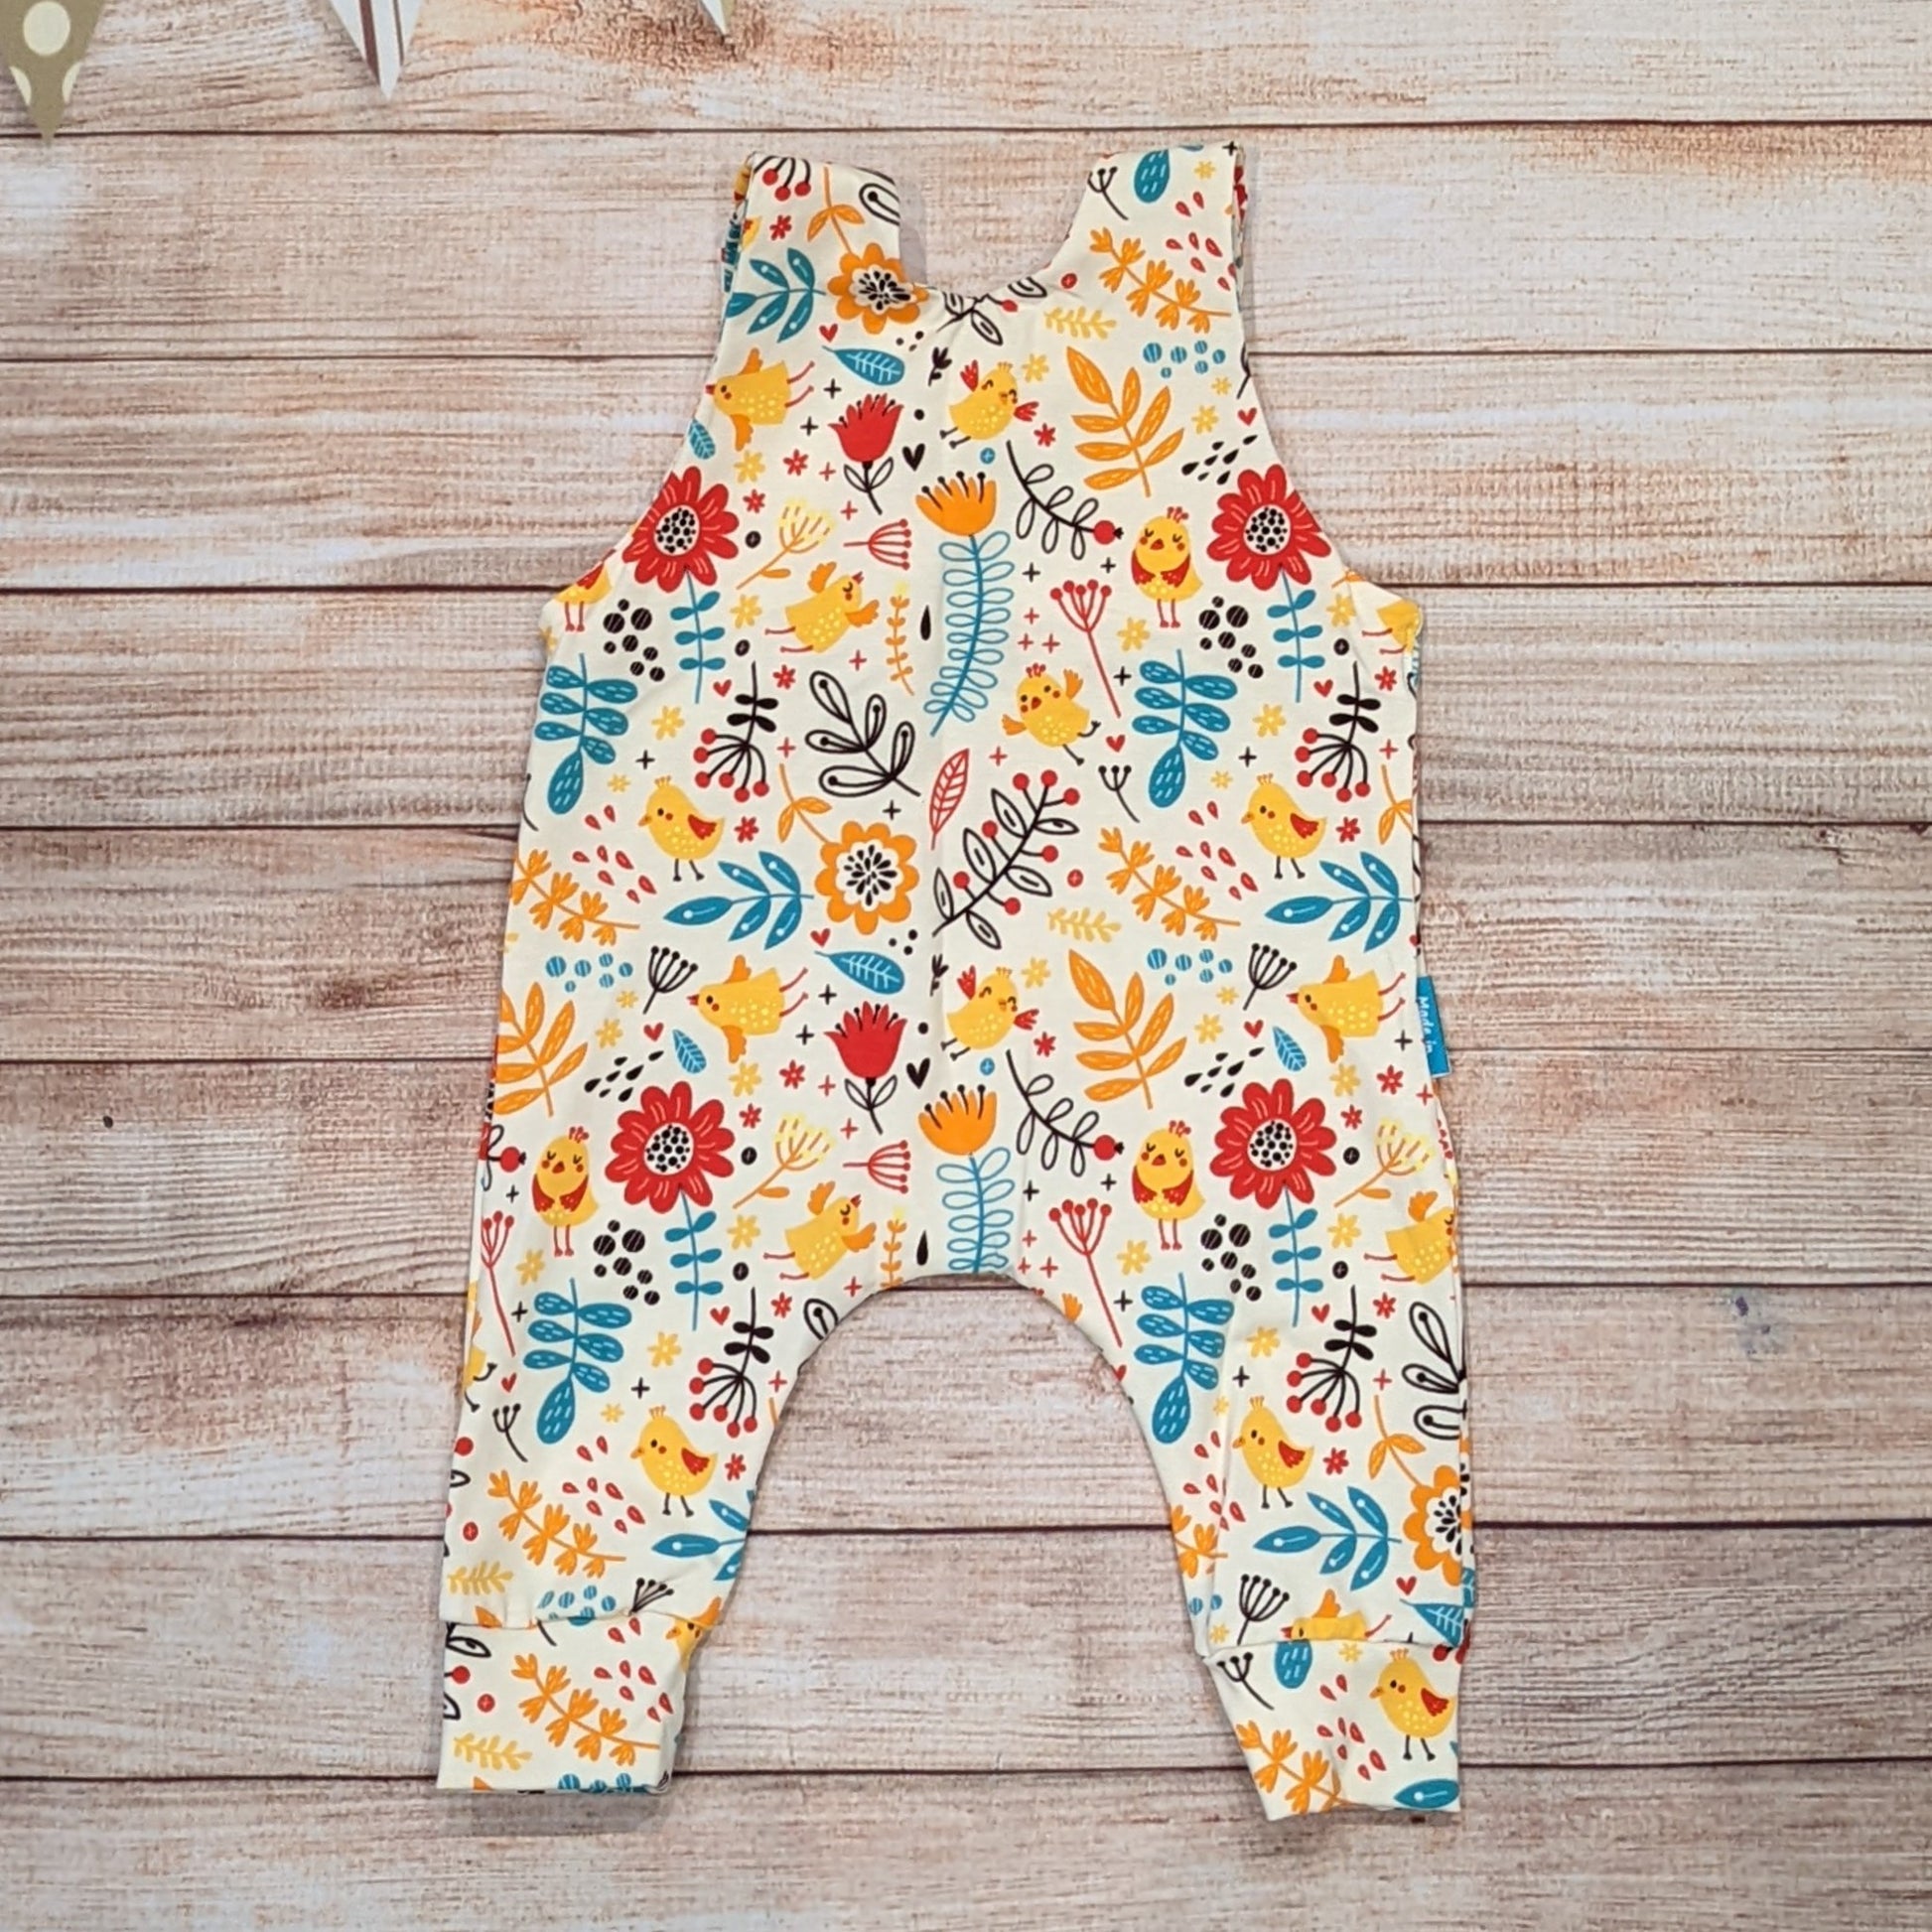 The gorgeous cream chicks and flowers sleeveless romper, perfect for spring. Handmade using cream chicks cotton jersey. Shown from the rear.